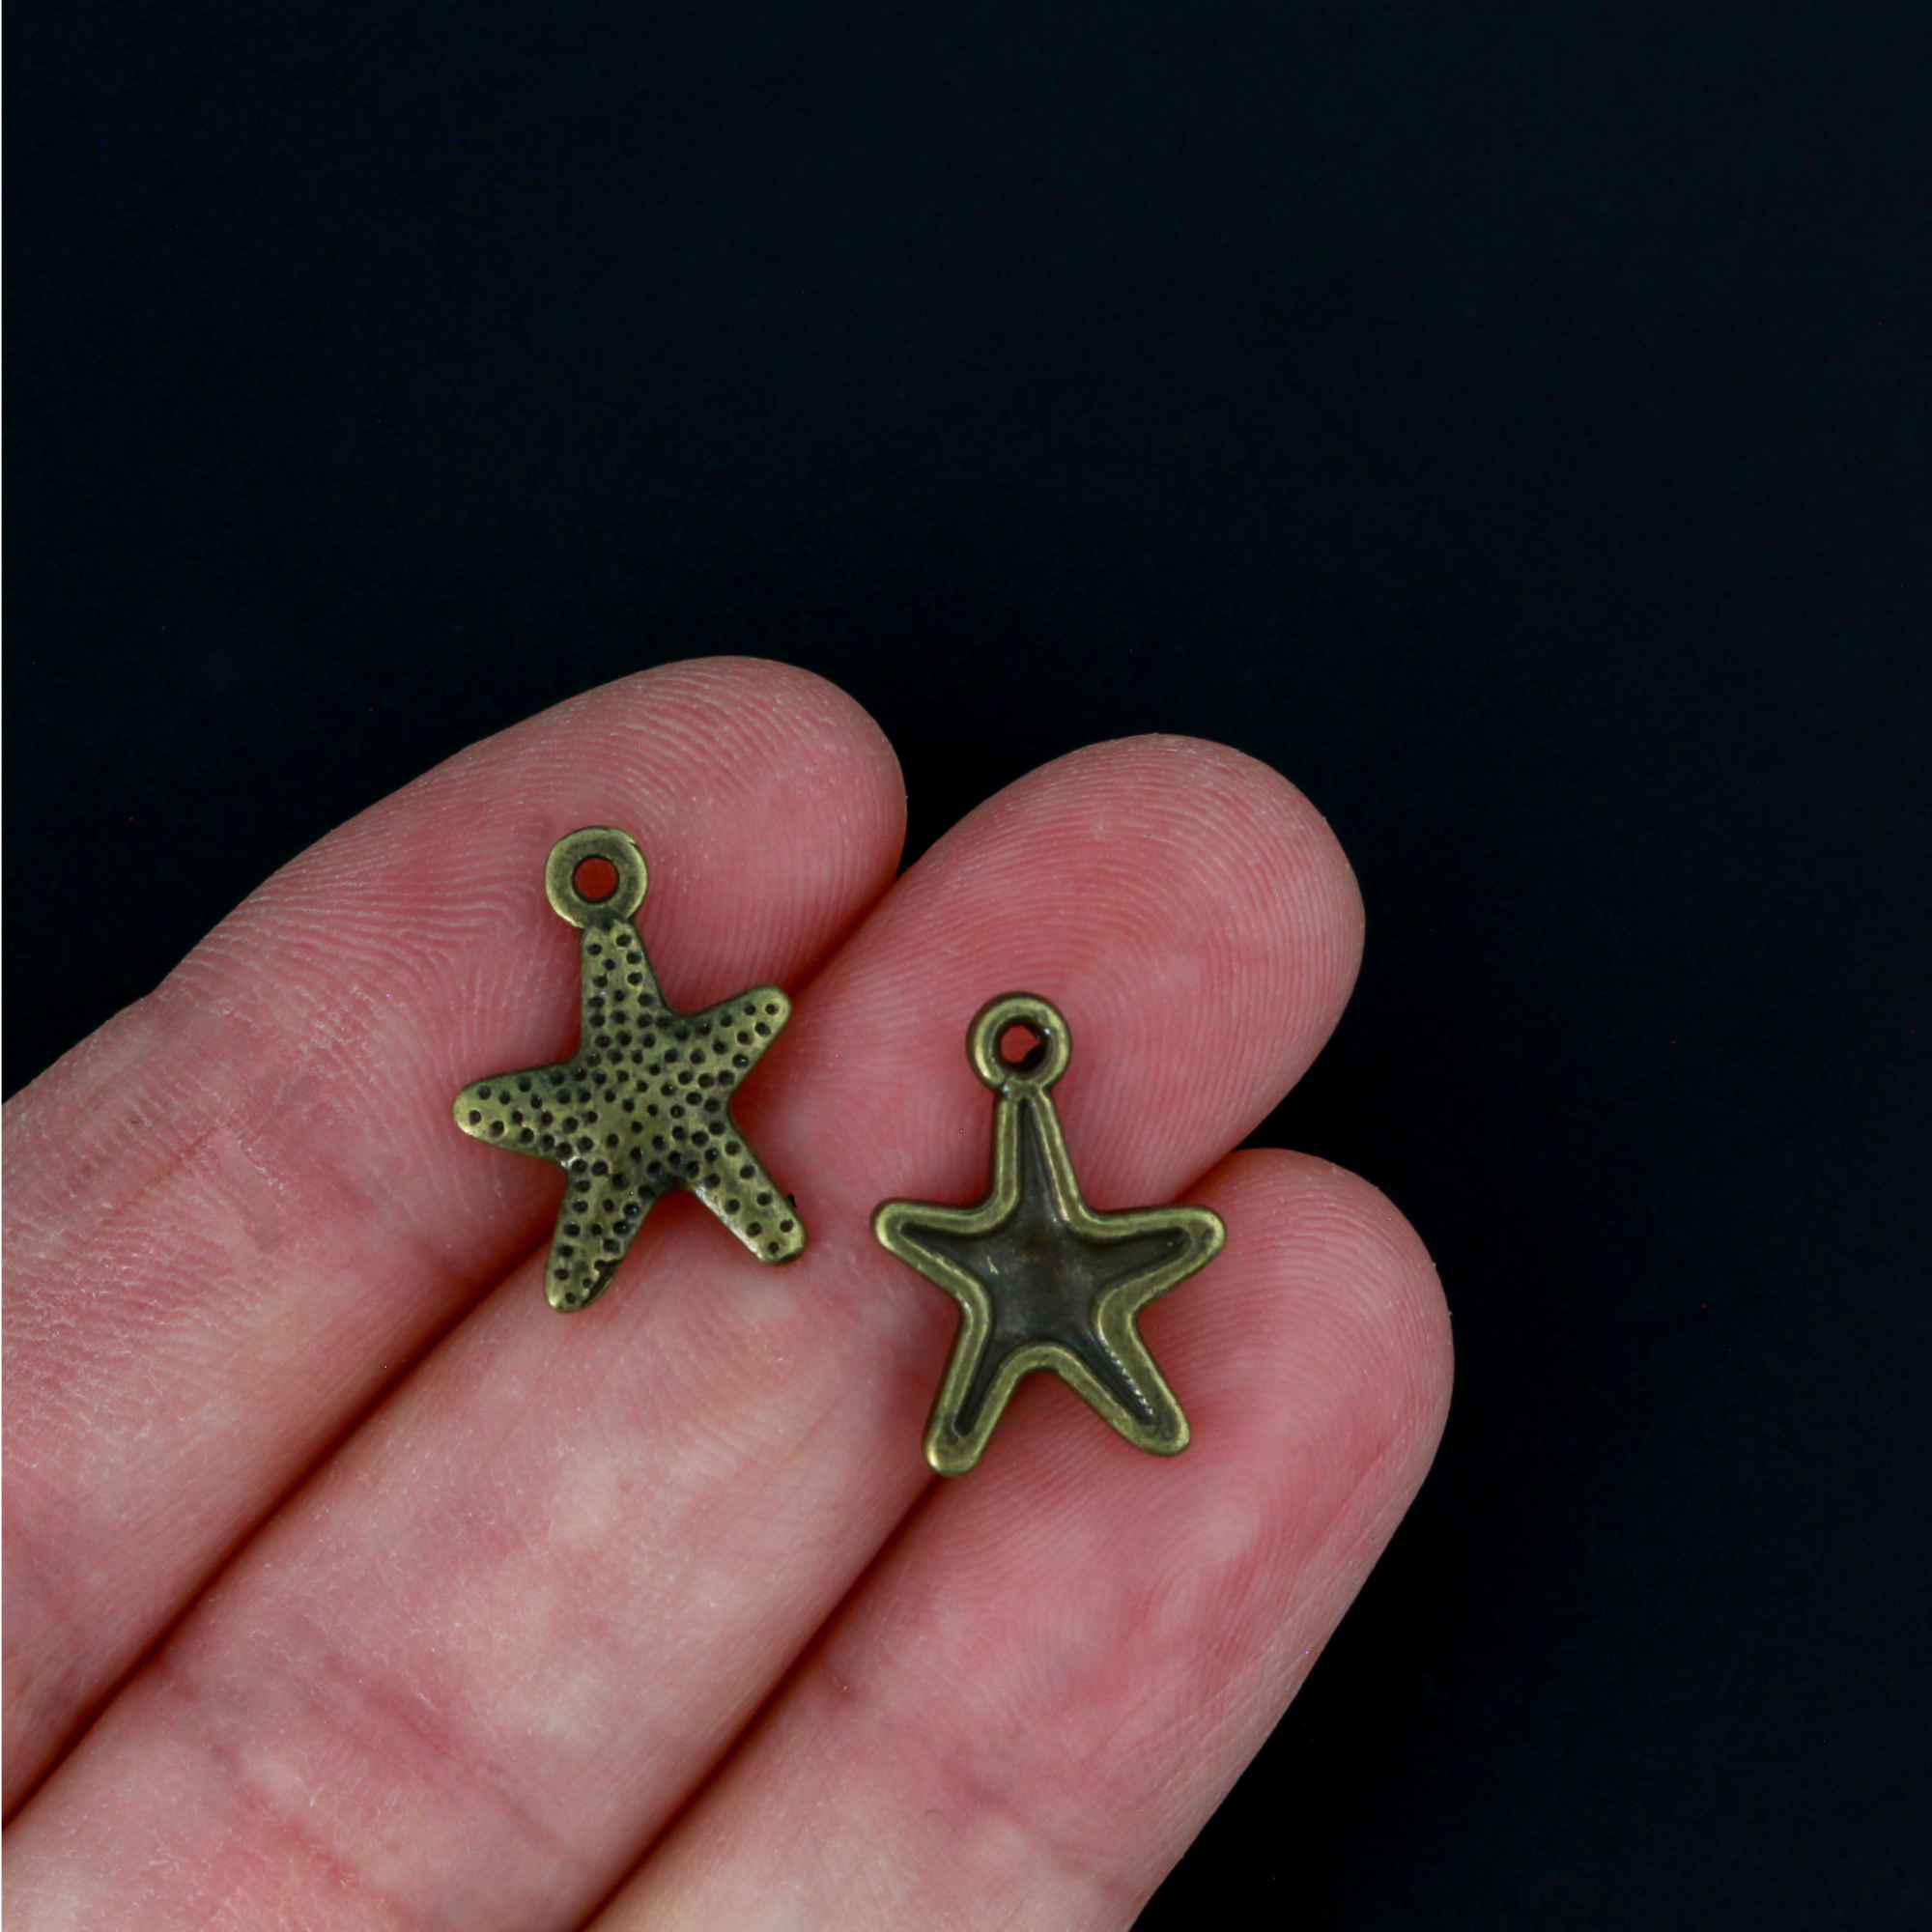 16mm long starfish charms in an antiqued bronze color.